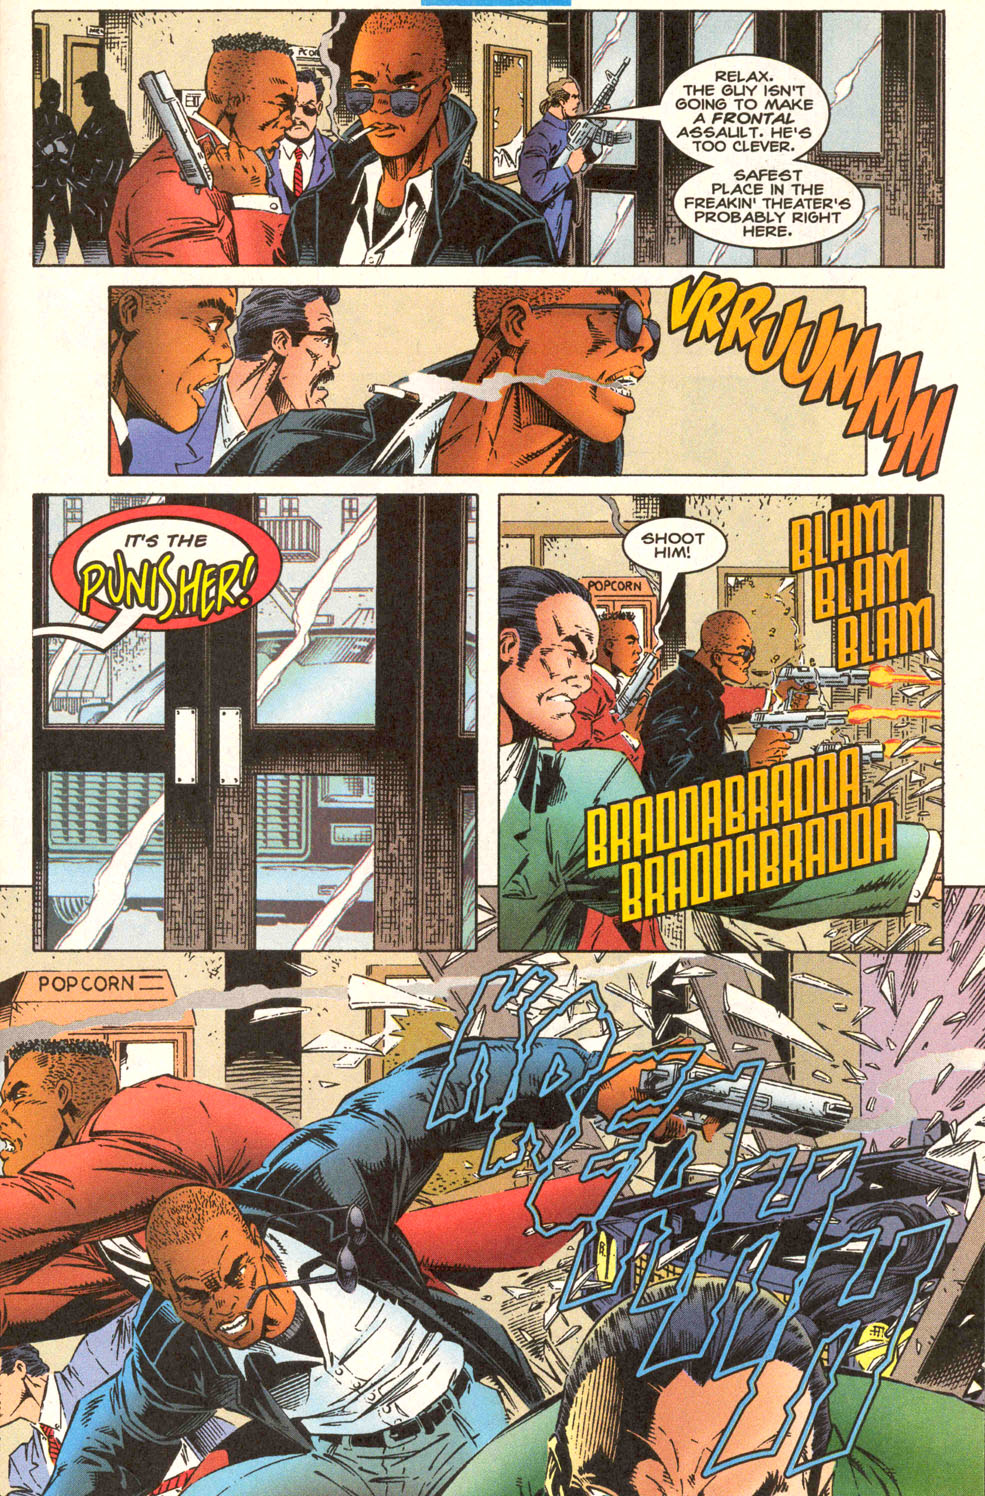 Punisher (1995) issue 10 - Last Shot Fired - Page 15